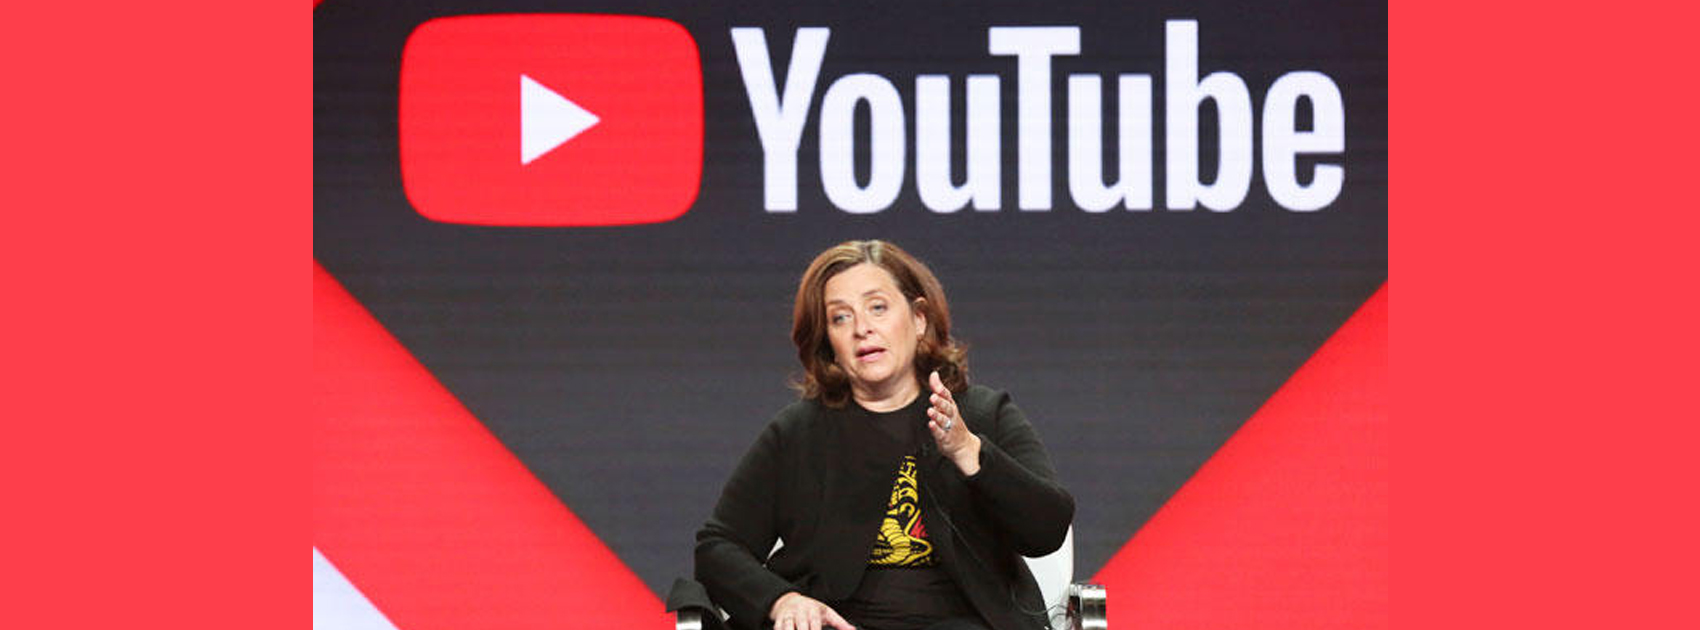 YouTube Launch Original Programming In India,Startup Stories,Startup Business News India,Technology Updates India,Technology News 2018,YouTube Original Content in India,Netflix Indian original Series,YouTube Eyeing India for Latest Launch,YouTube Premium,YouTube Red